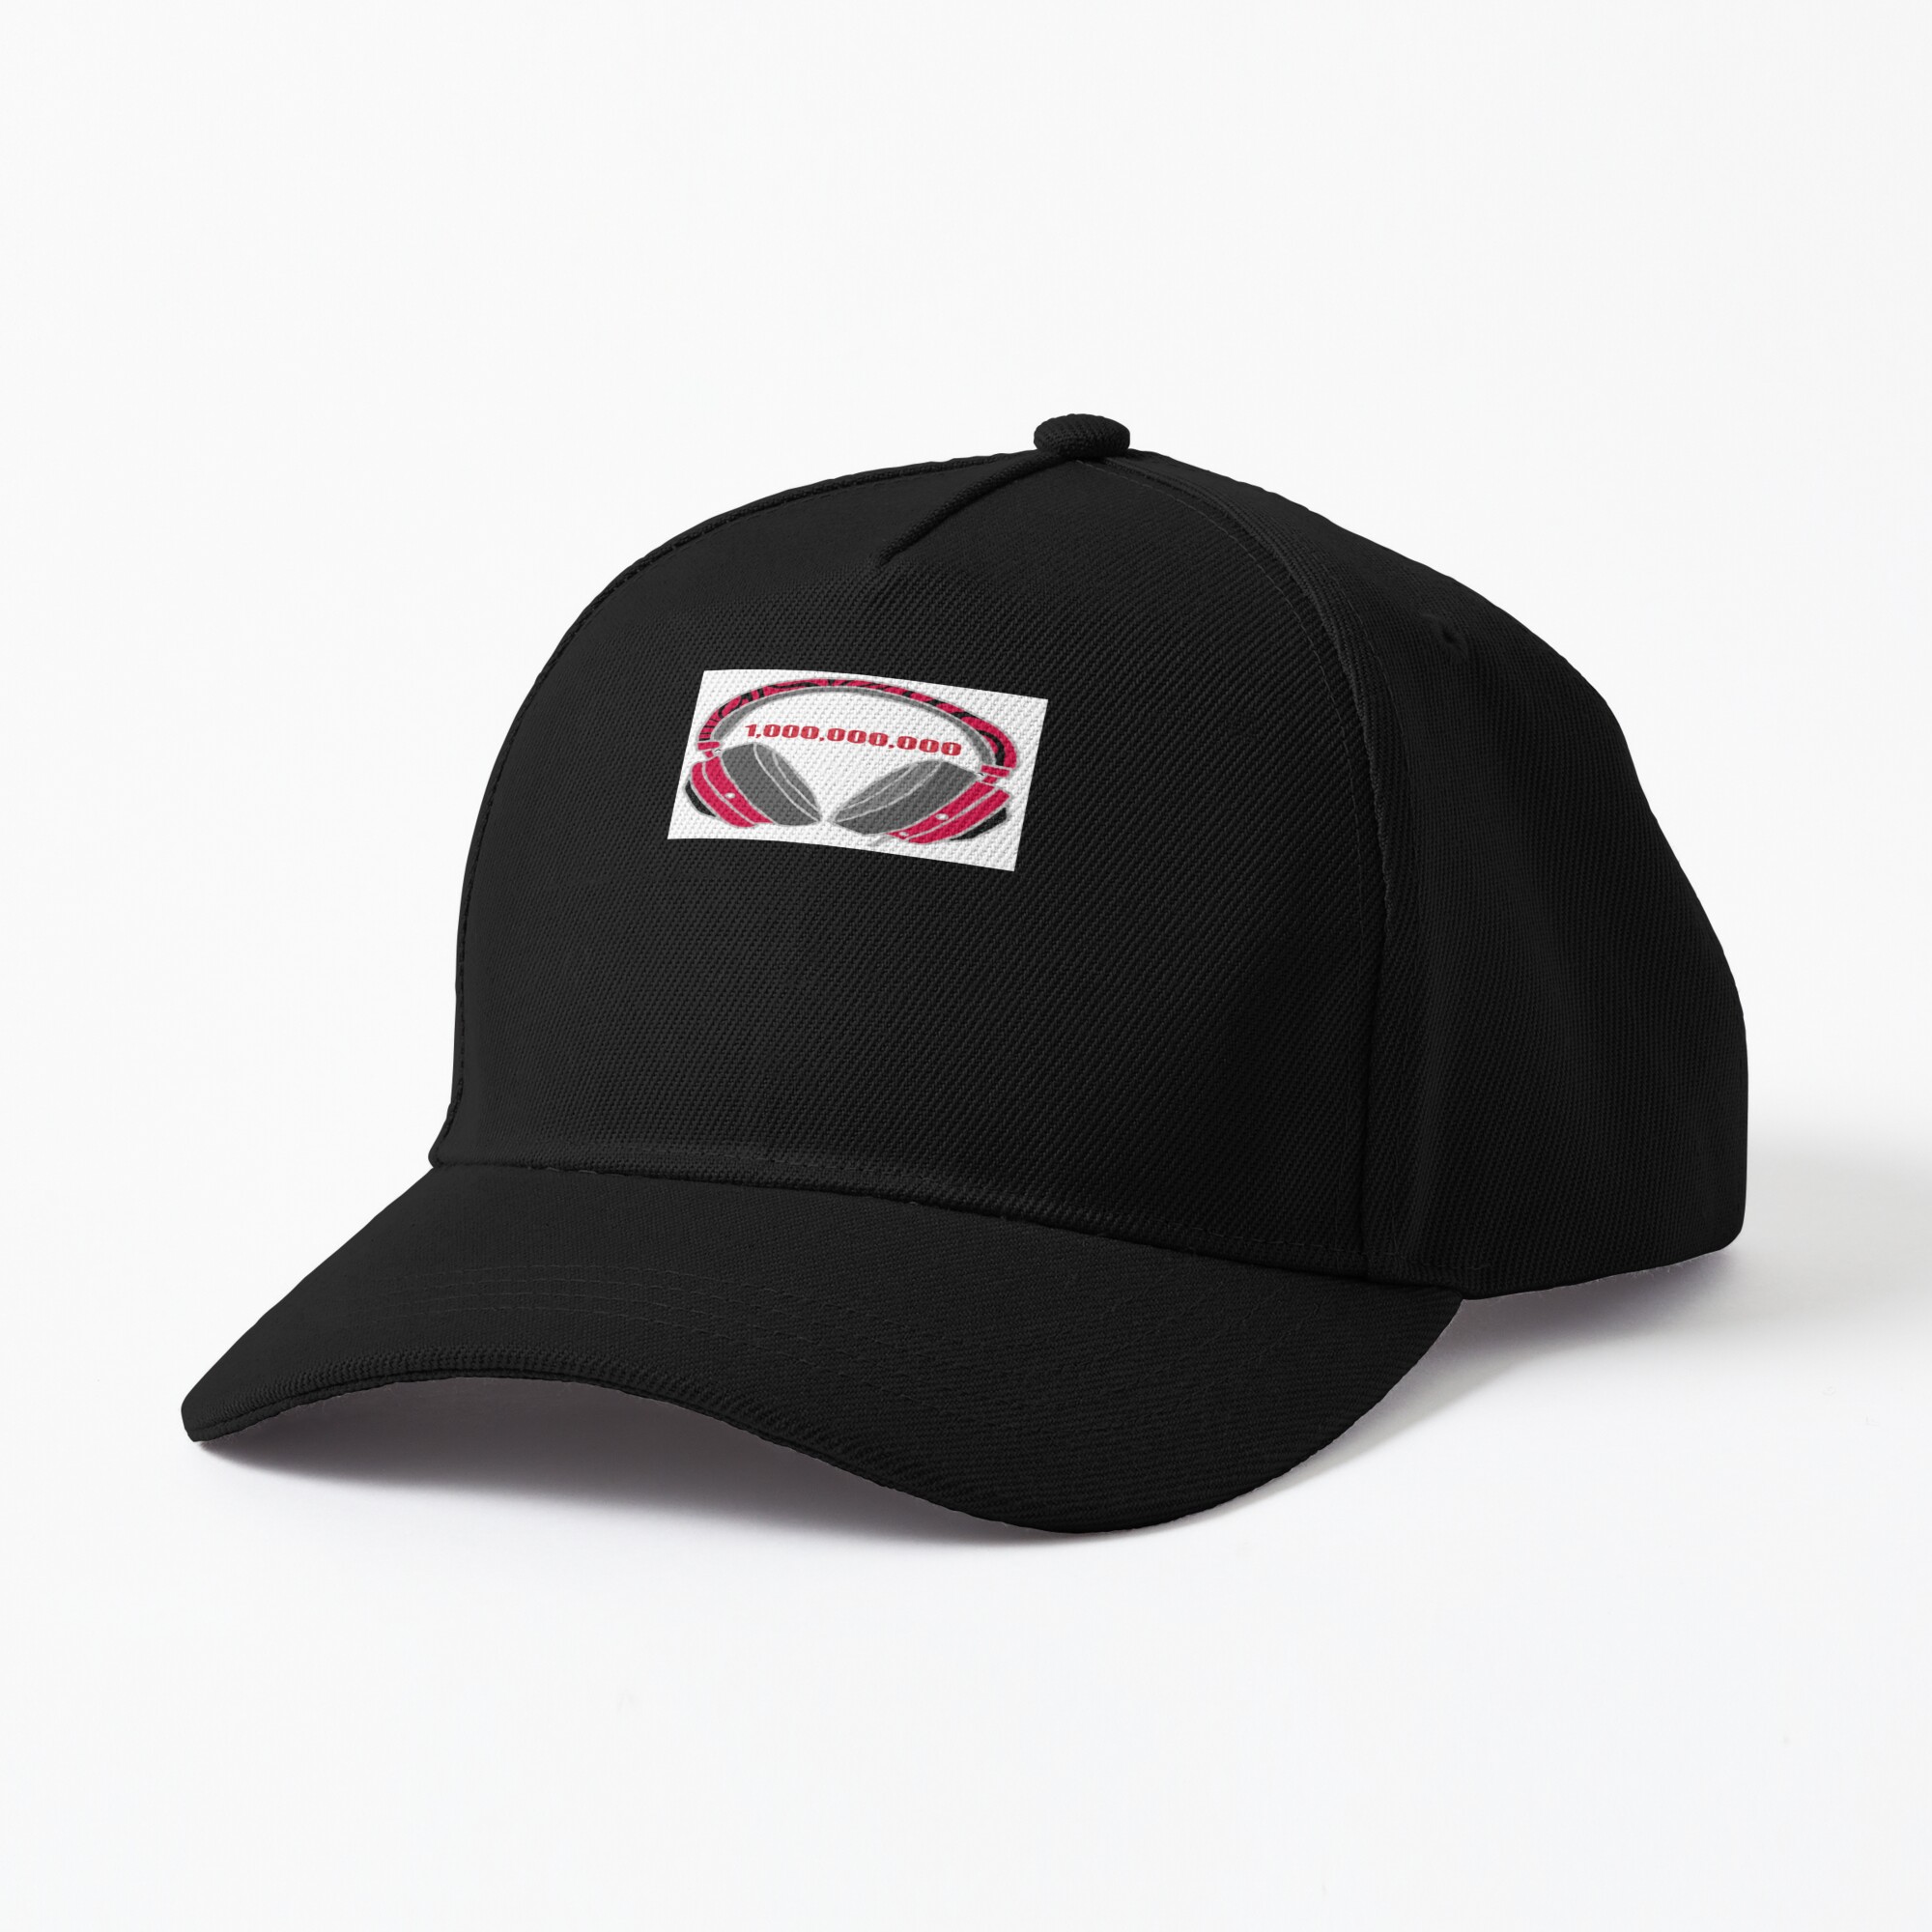 ssrcobaseball capproduct00000044f0b734a5front three quartersquare2000x2000 bgf8f8f8 5 - Pewdiepie Store